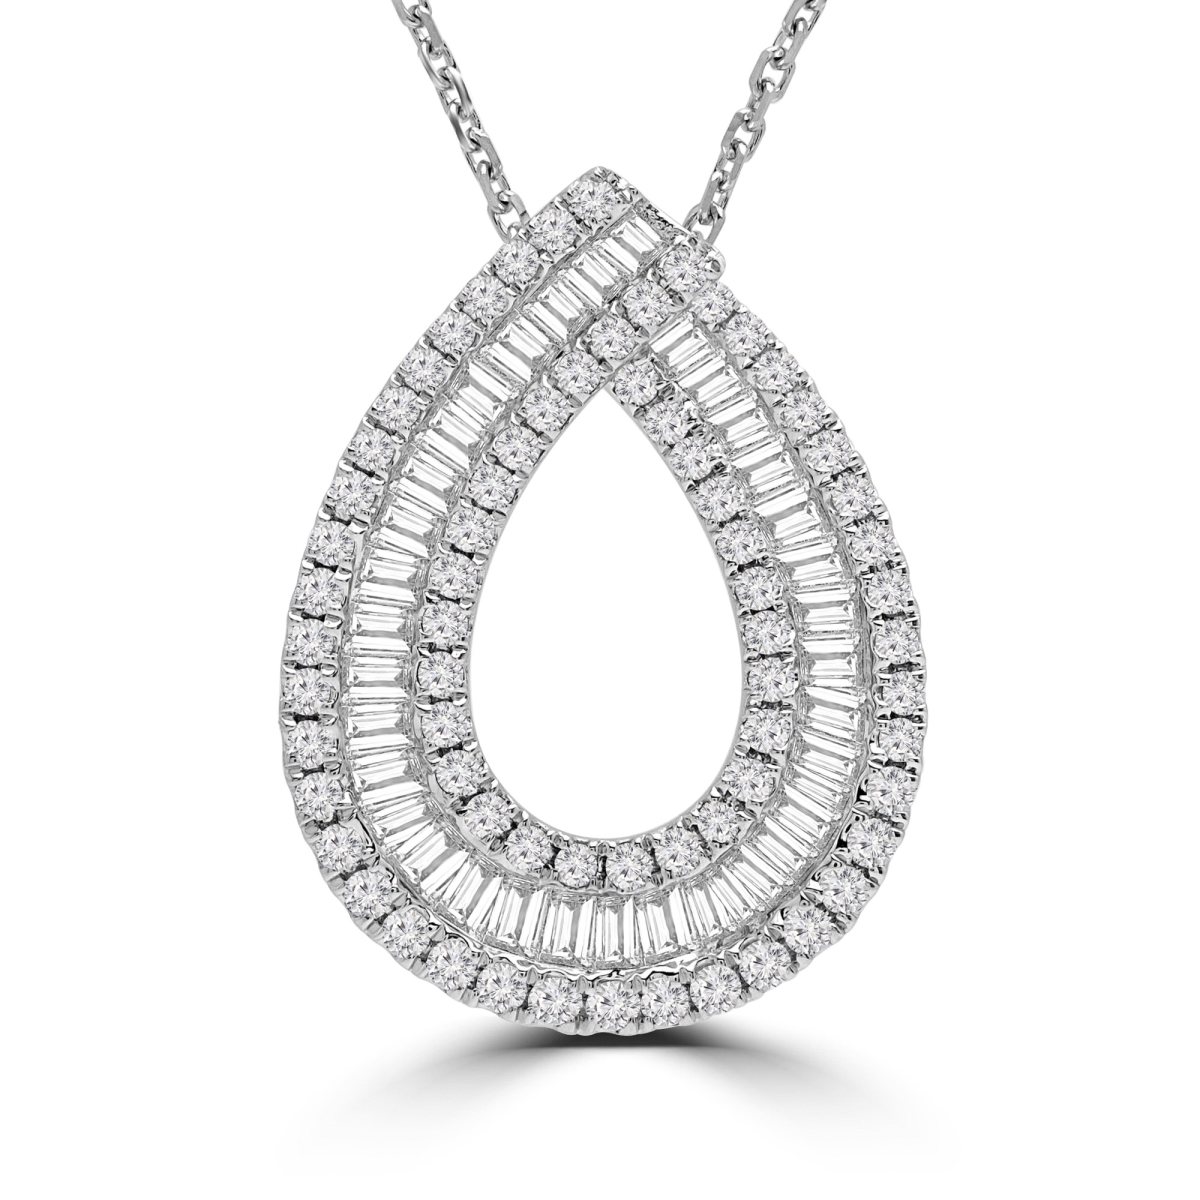 Md190307 1.14 Ctw Baguette Diamond Three-row Fancy Pendant Necklace In 18k White Gold